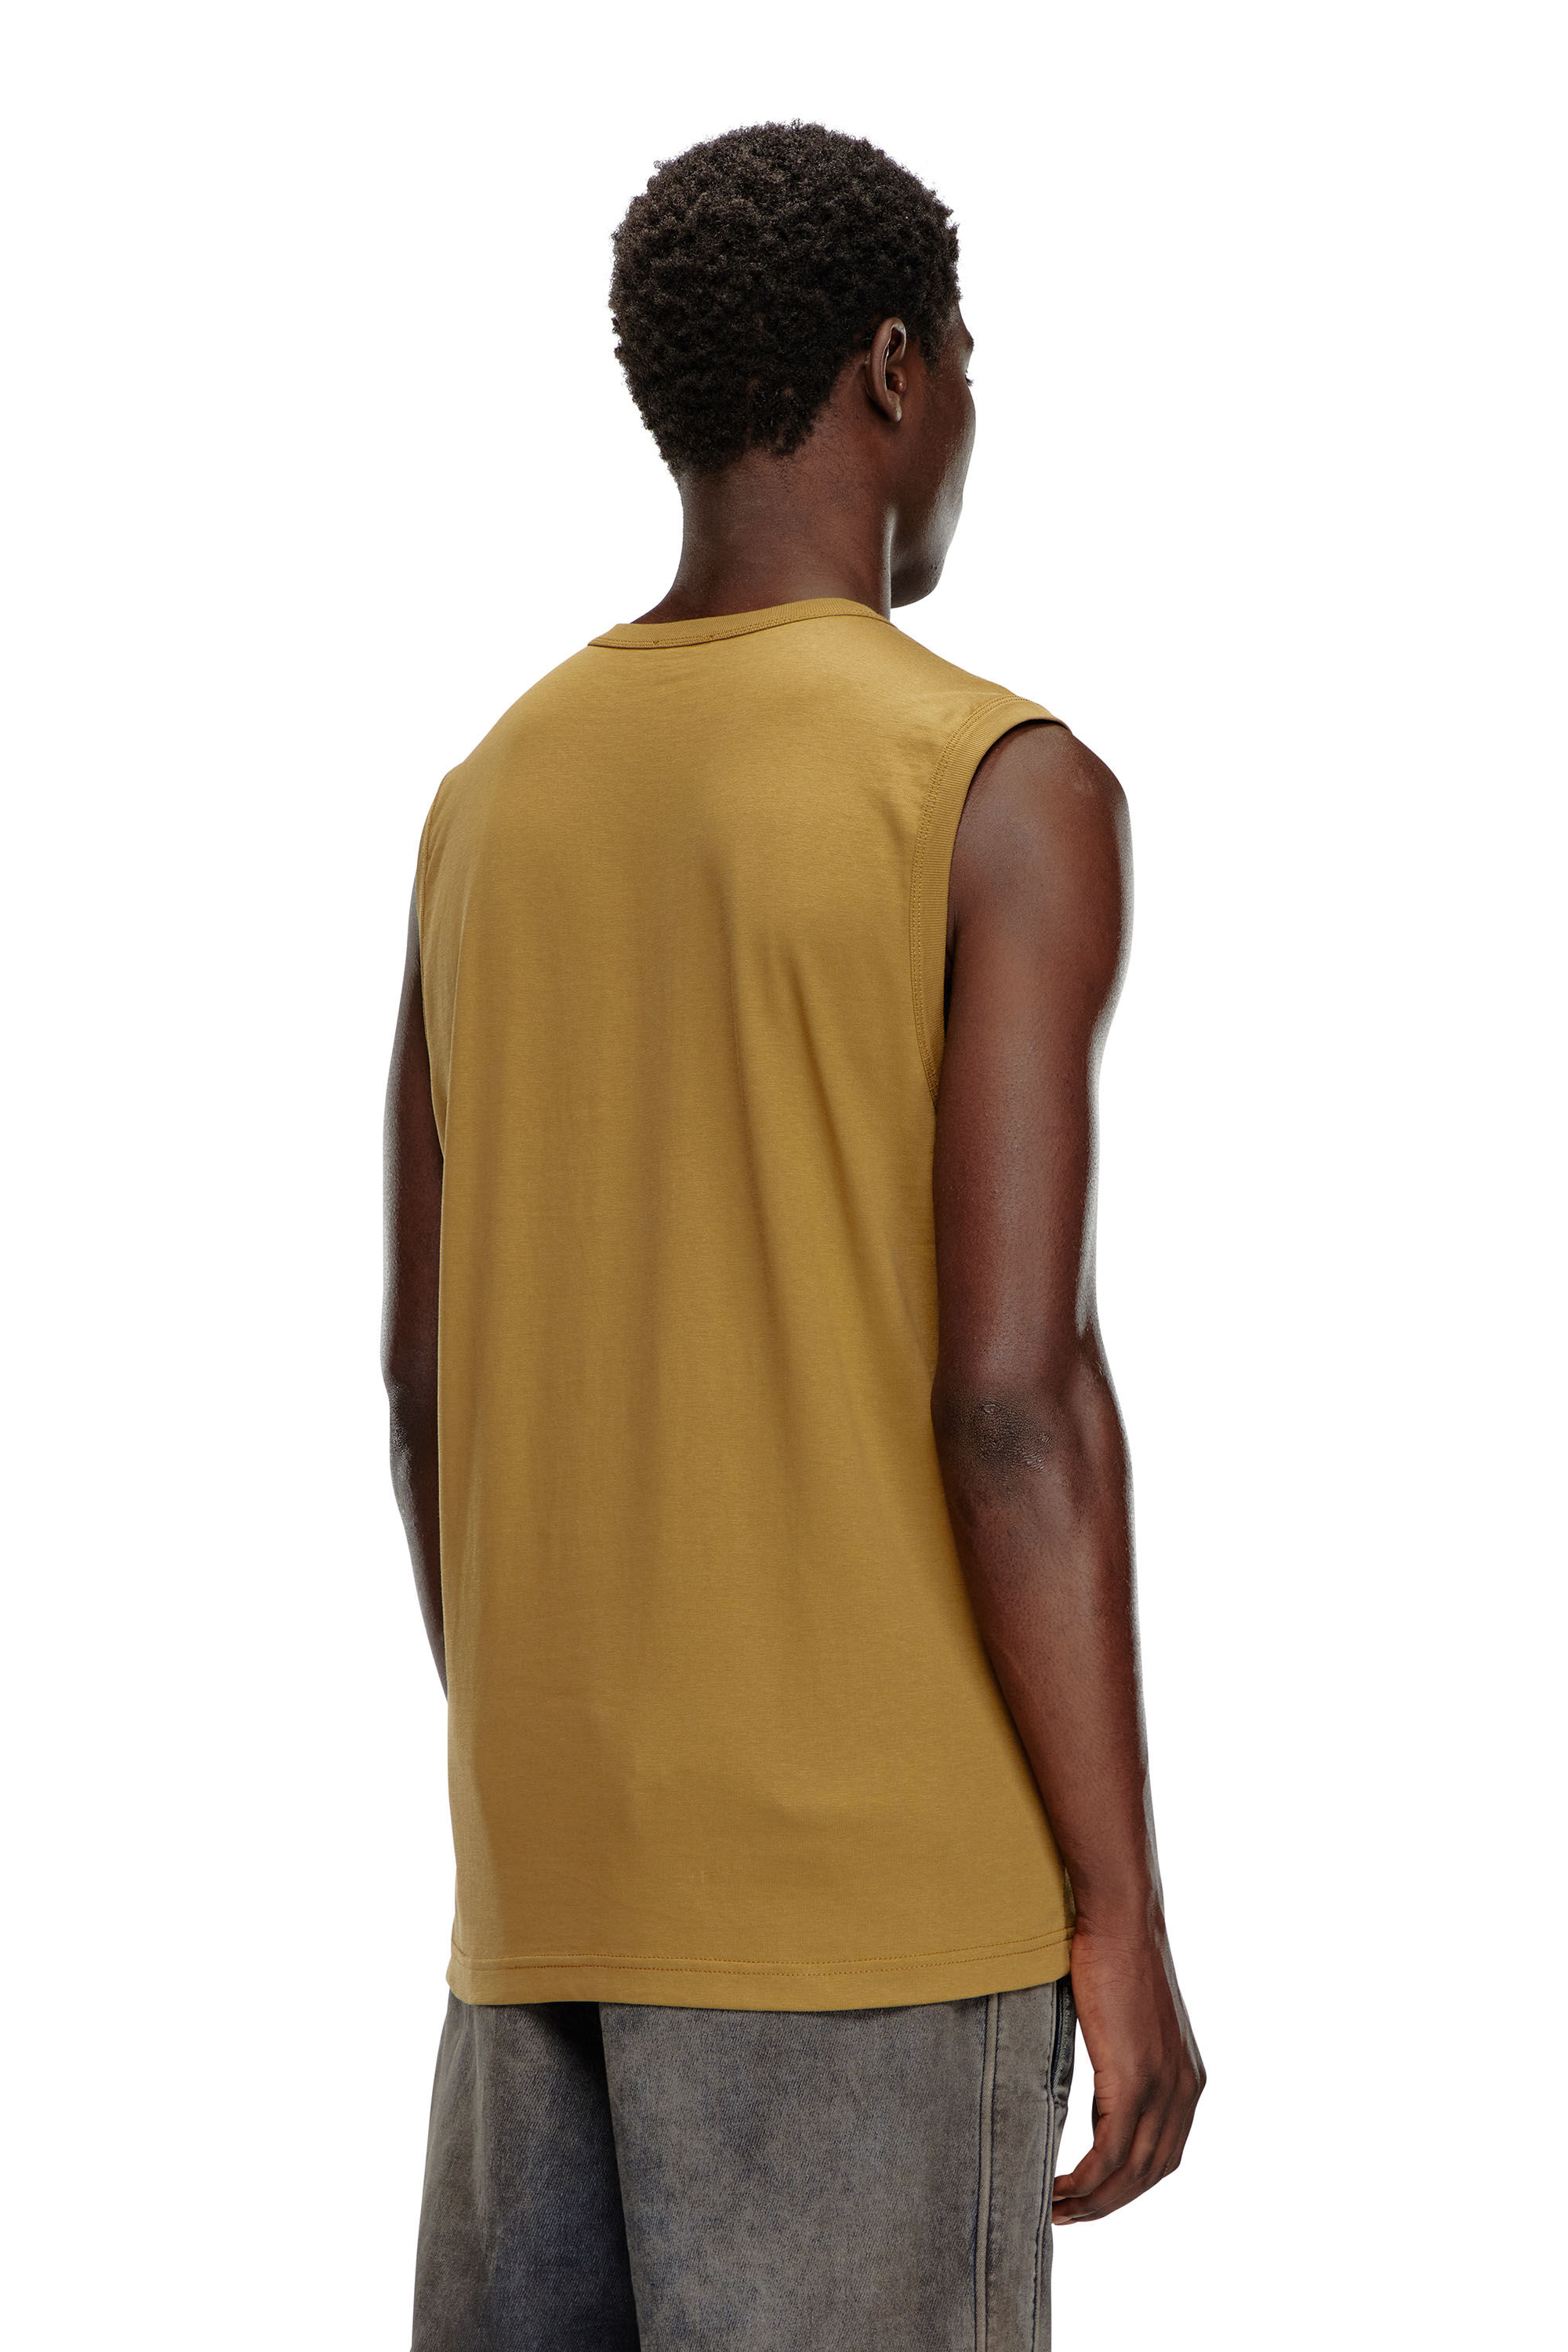 Diesel - T-BISCO-OD, Man Tank top with injection-moulded Oval D in ToBeDefined - Image 4